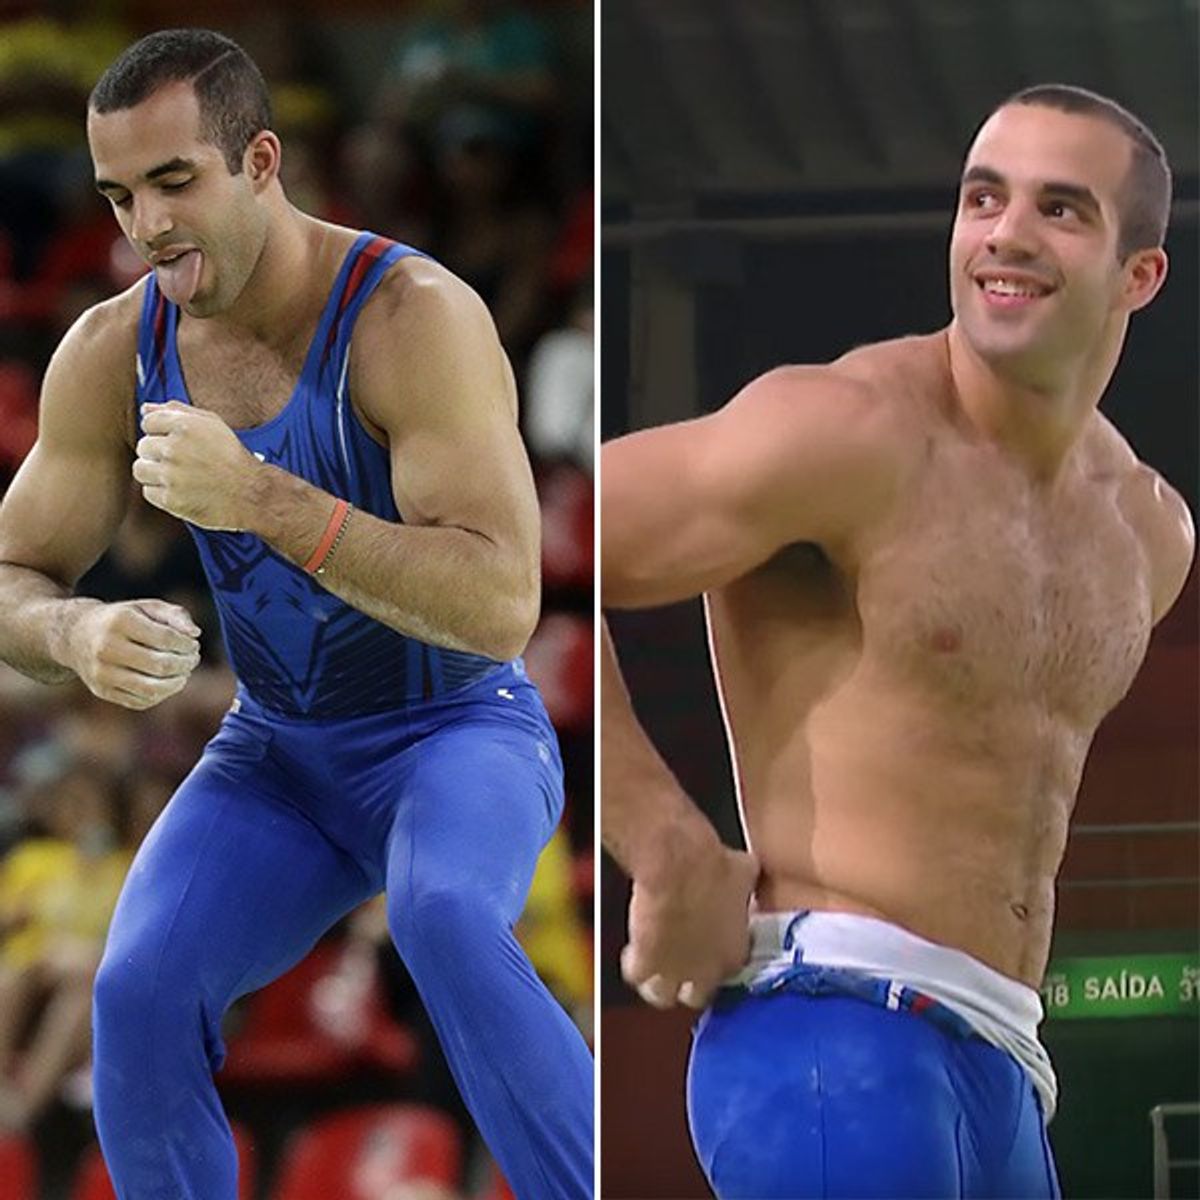 Danell Leyva, Initial Alternate, Leaves Rio As The Most Decorated American Male Gymnast